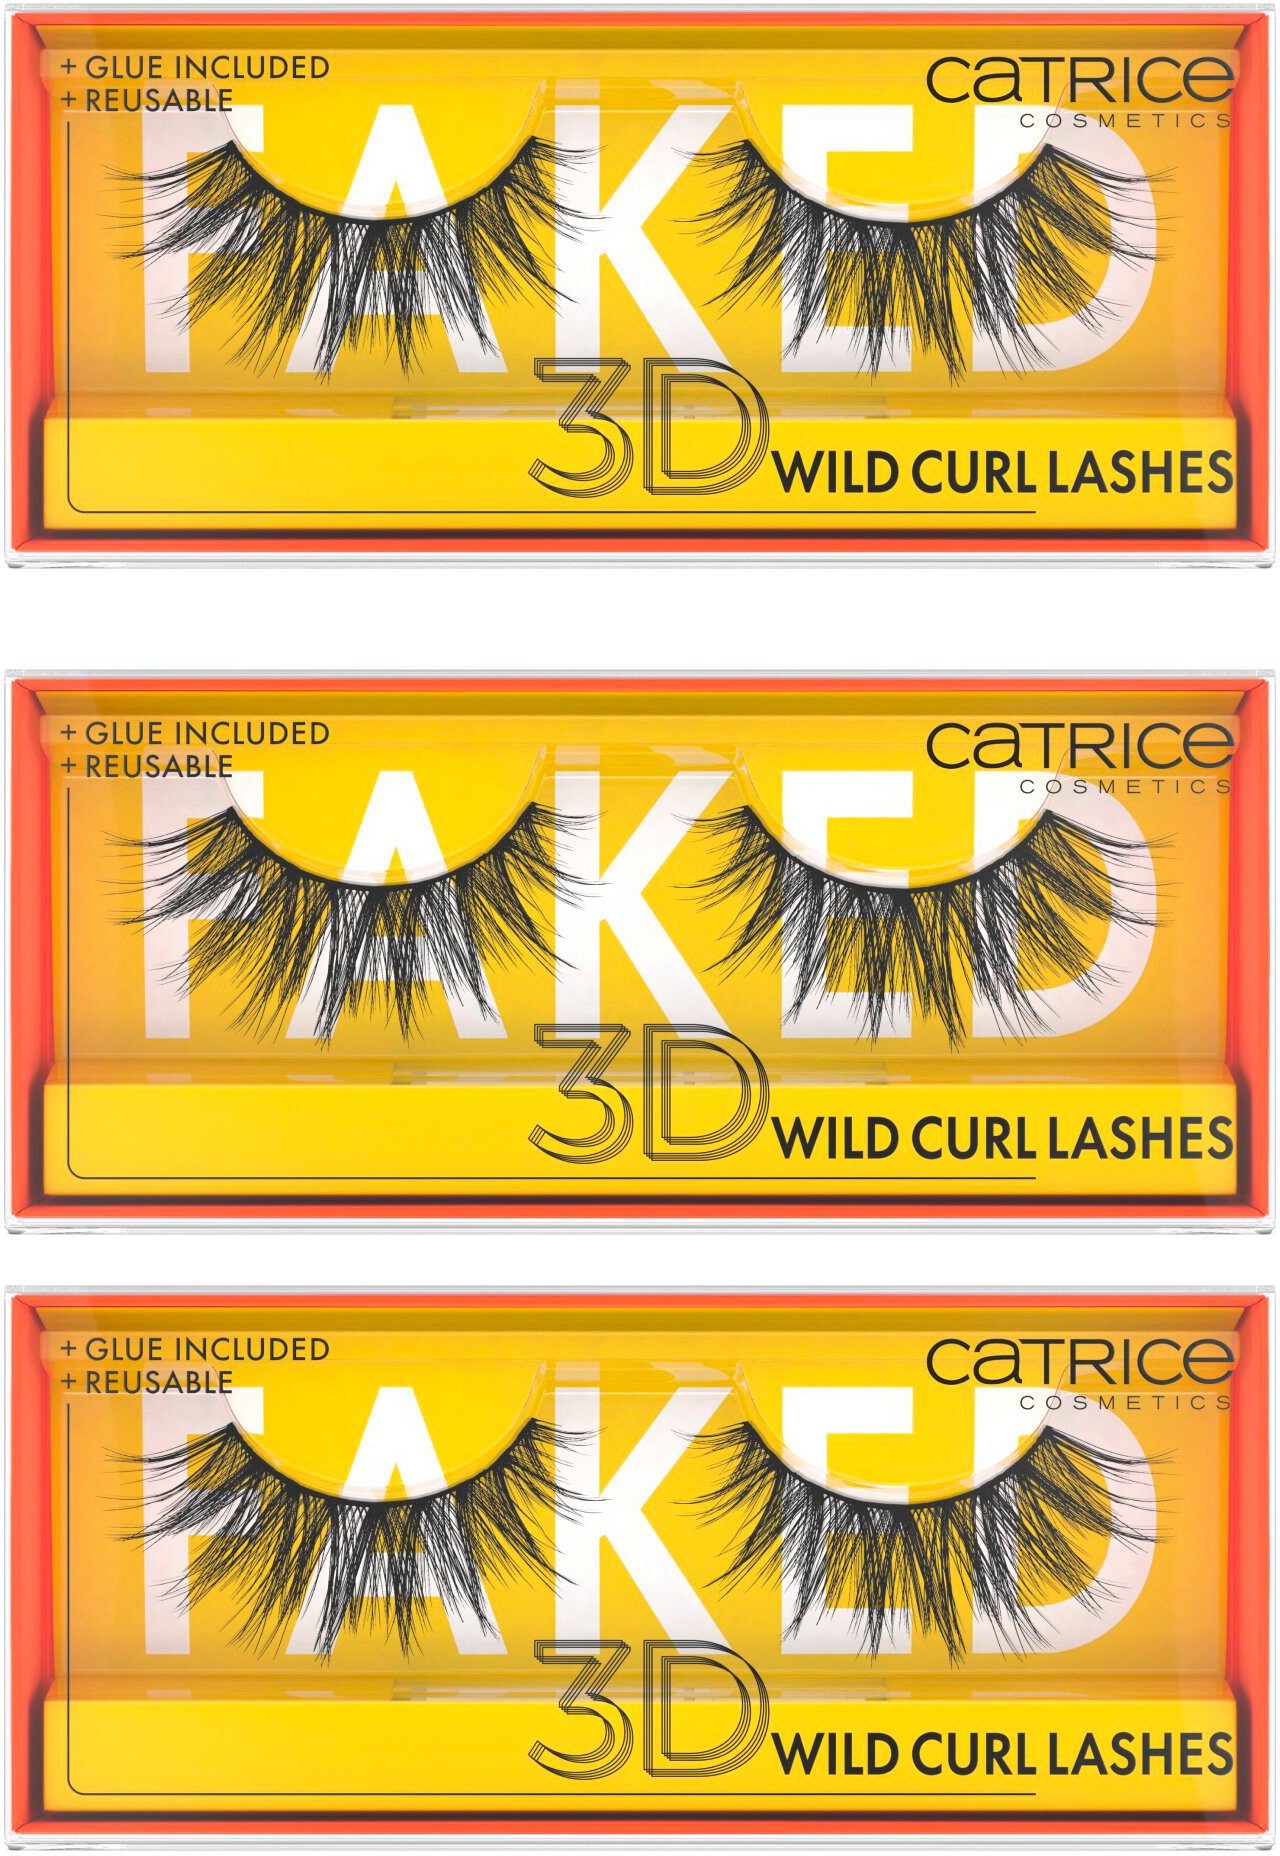 Wild Faked 3 Bandwimpern Catrice Set, Curl tlg. Lashes, 3D